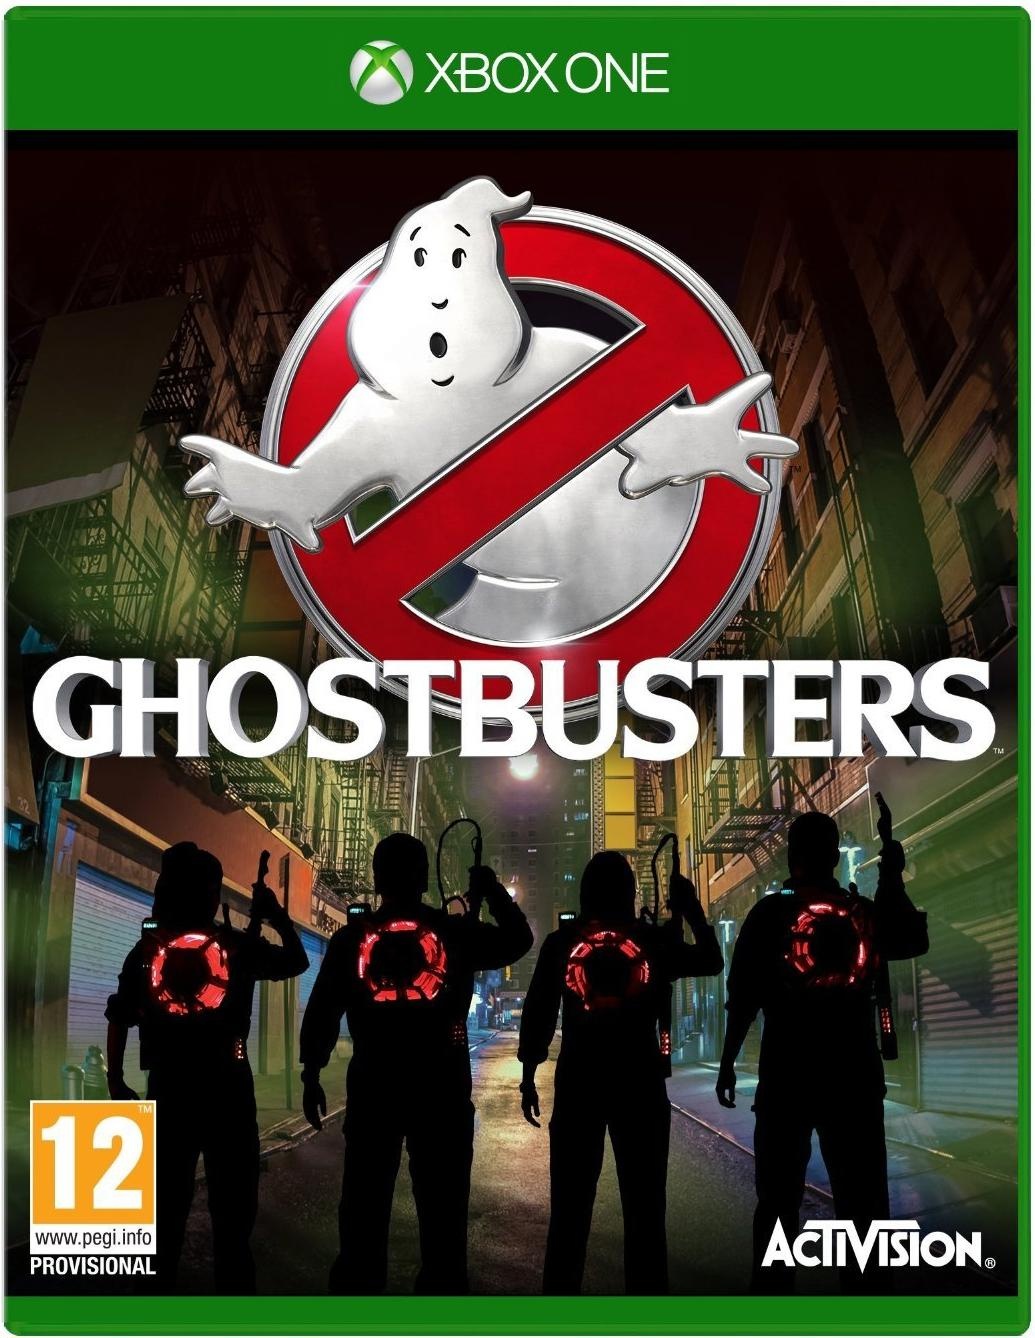 Activision, Ghostbusters: Video Game (2016)